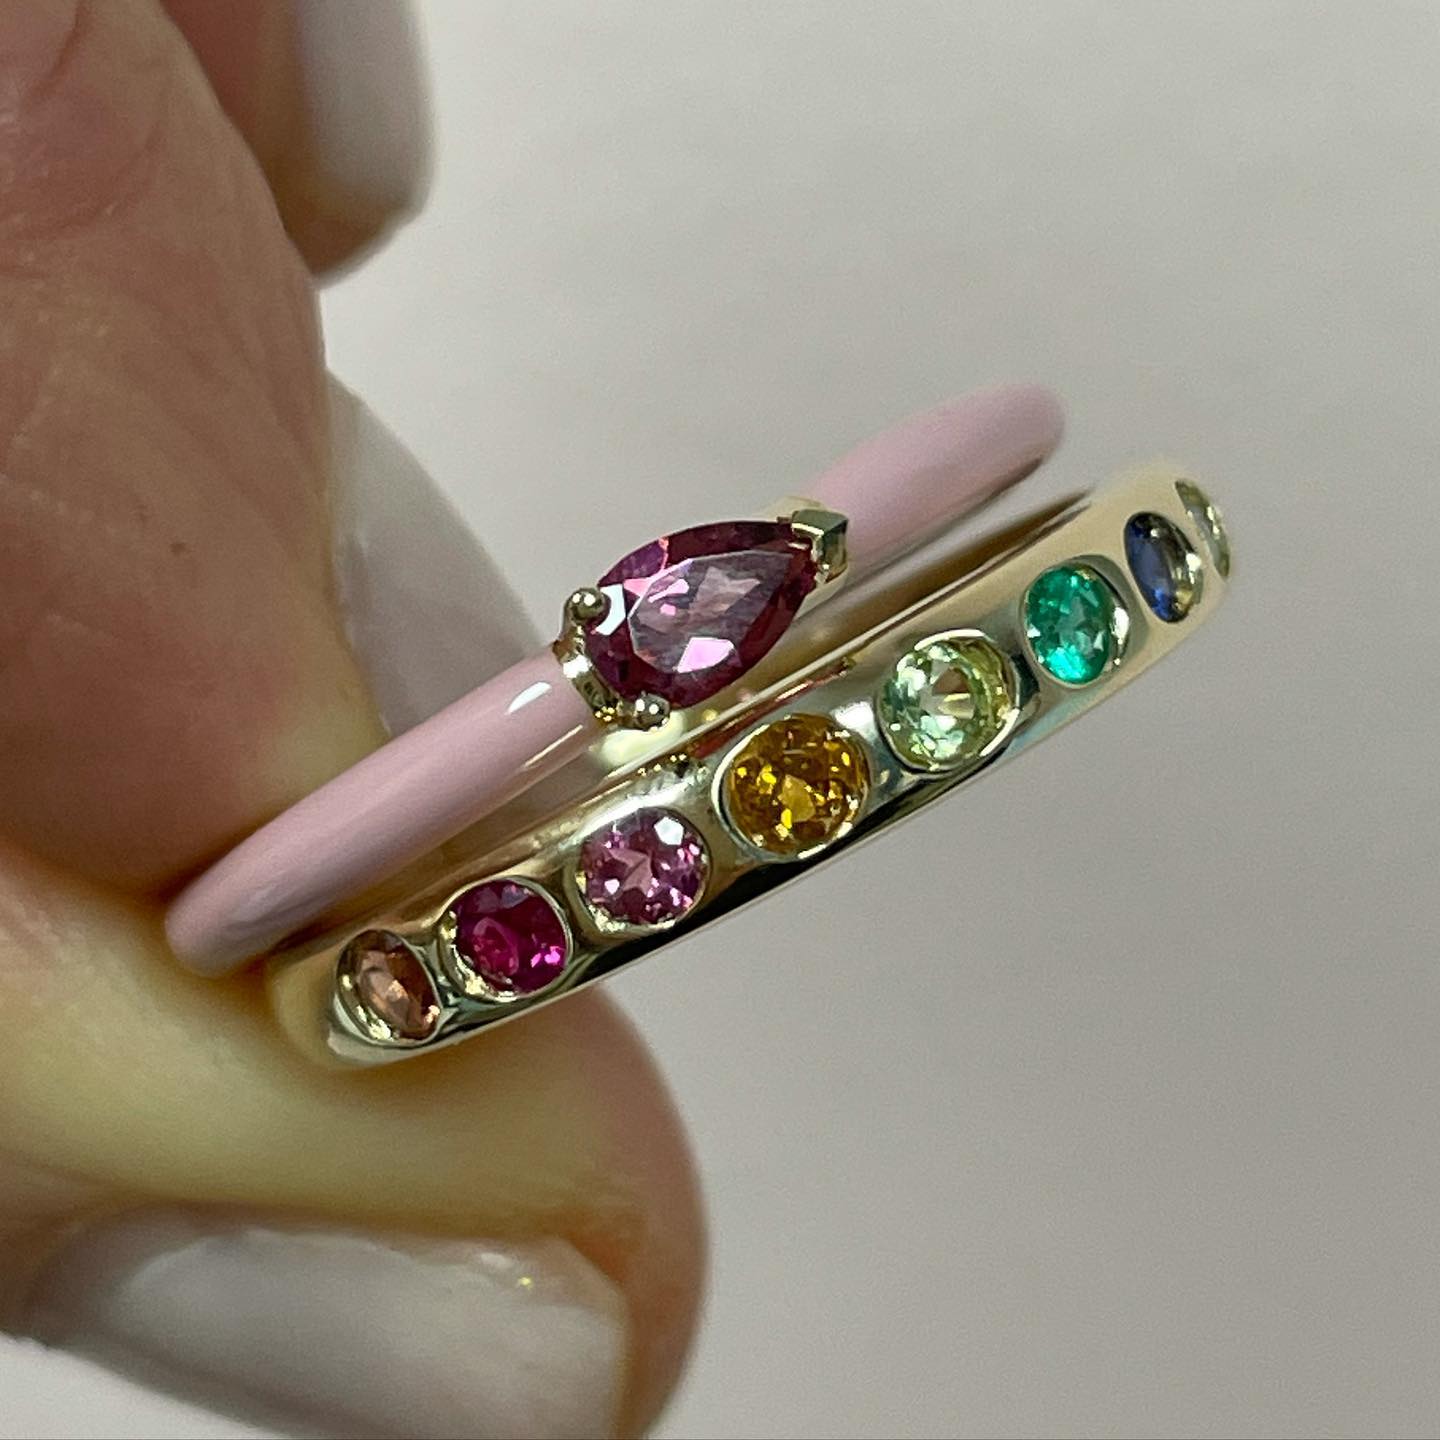 Skinny banned yellow gold ring with round multi color gemstones shown with beautiful pink enamel ring